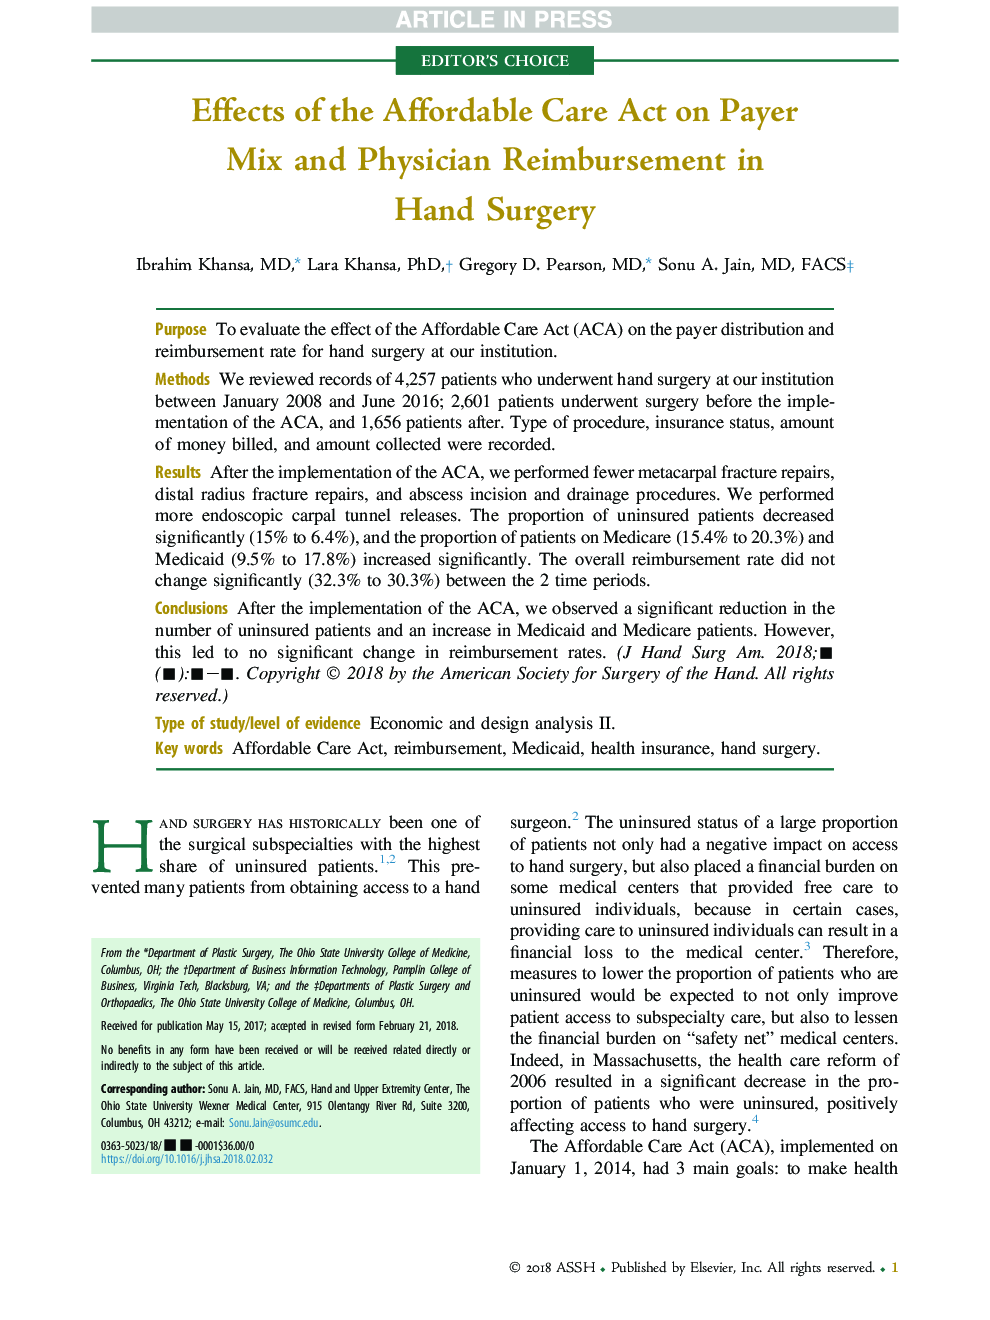 Effects of the Affordable Care Act on Payer Mix and Physician Reimbursement in Hand Surgery